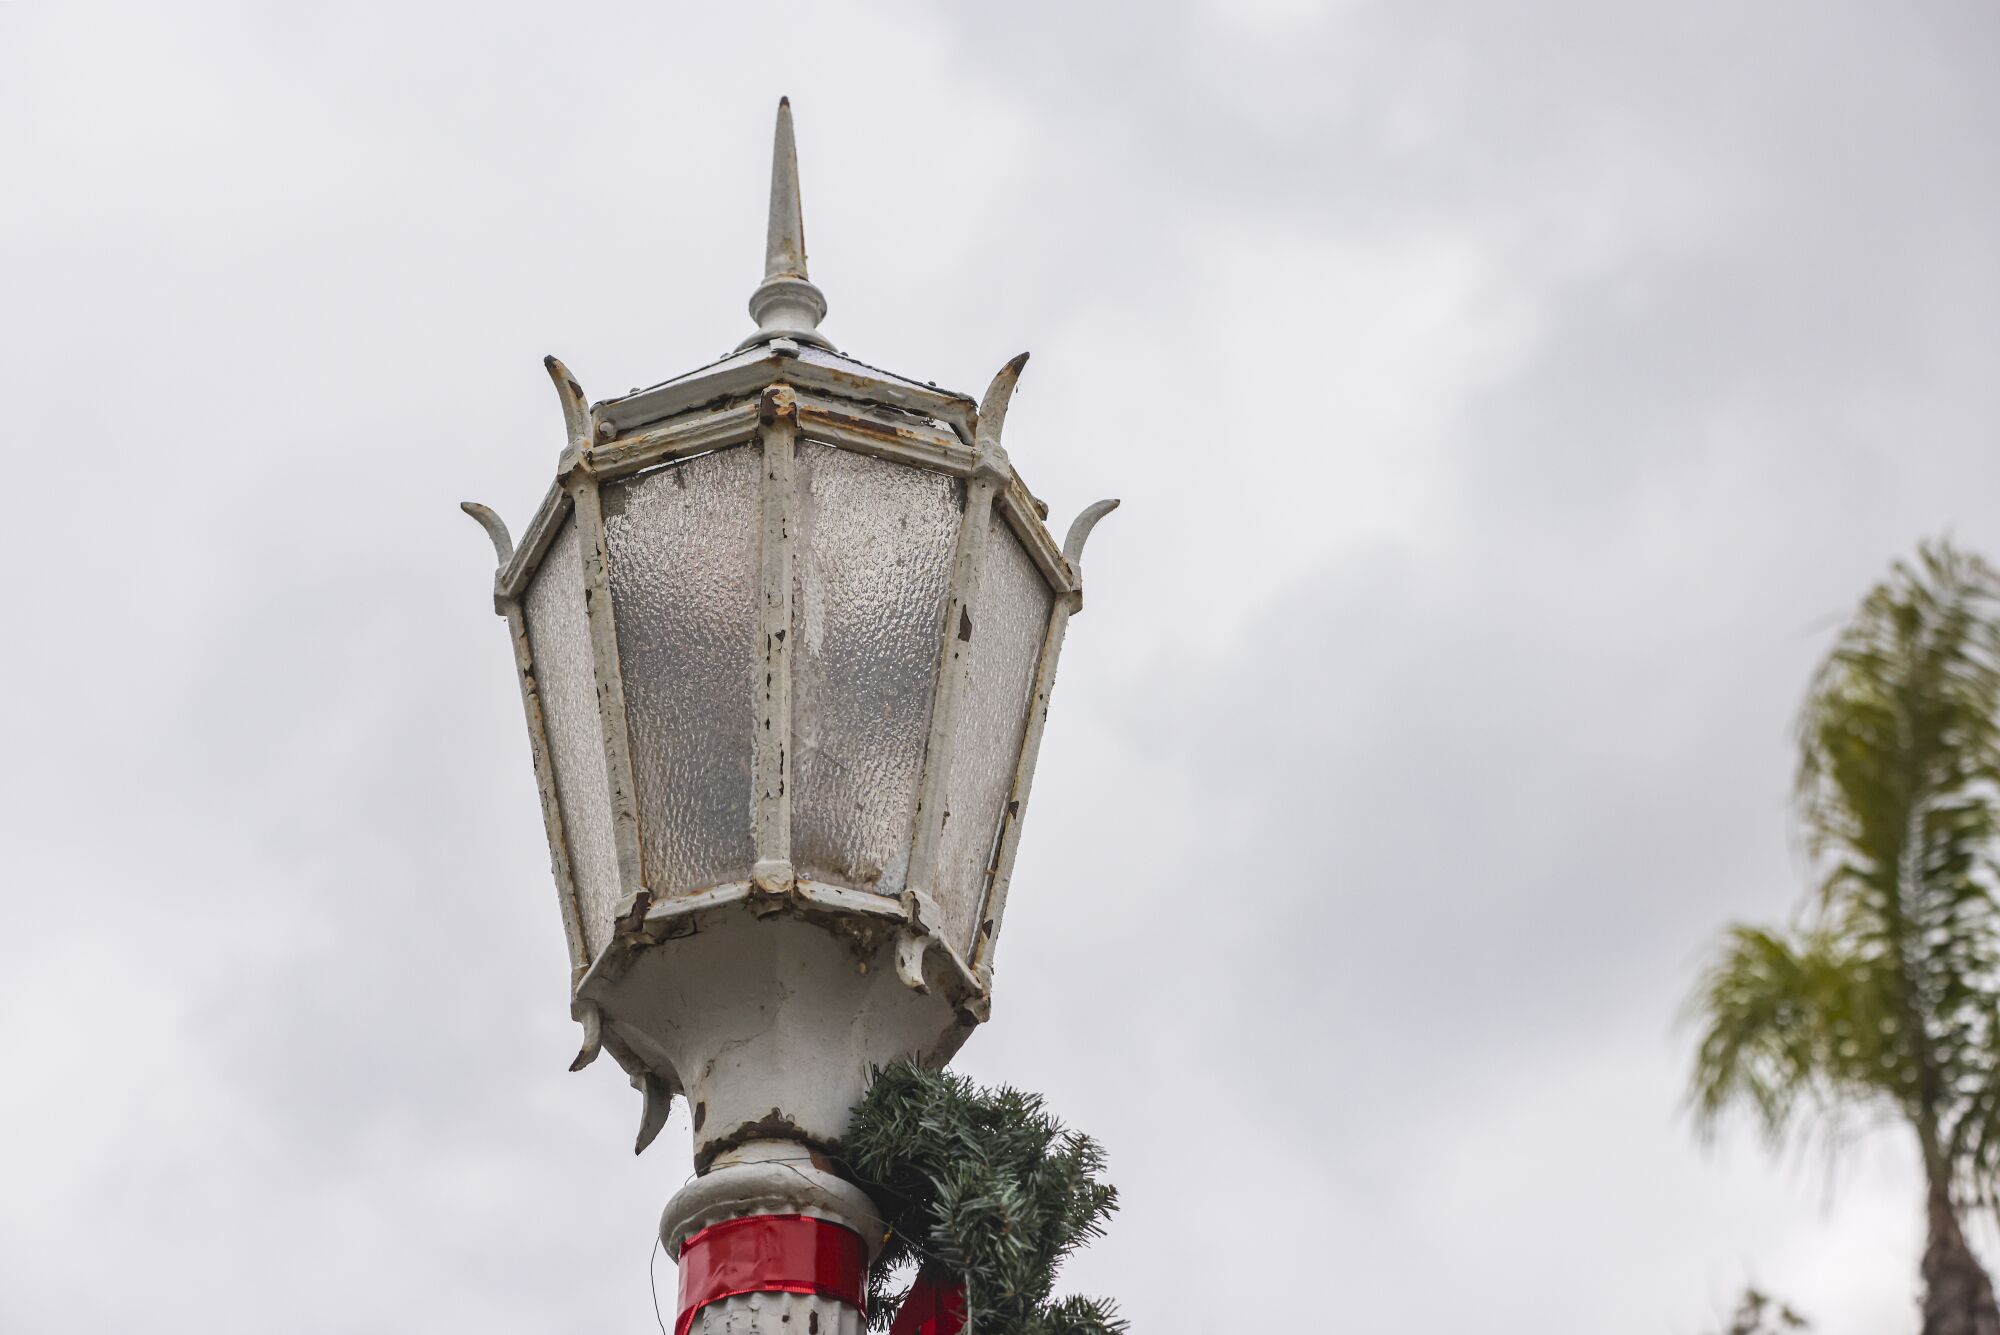 The lamp portion of an antique streetlight, with peeling paint and glass panels.